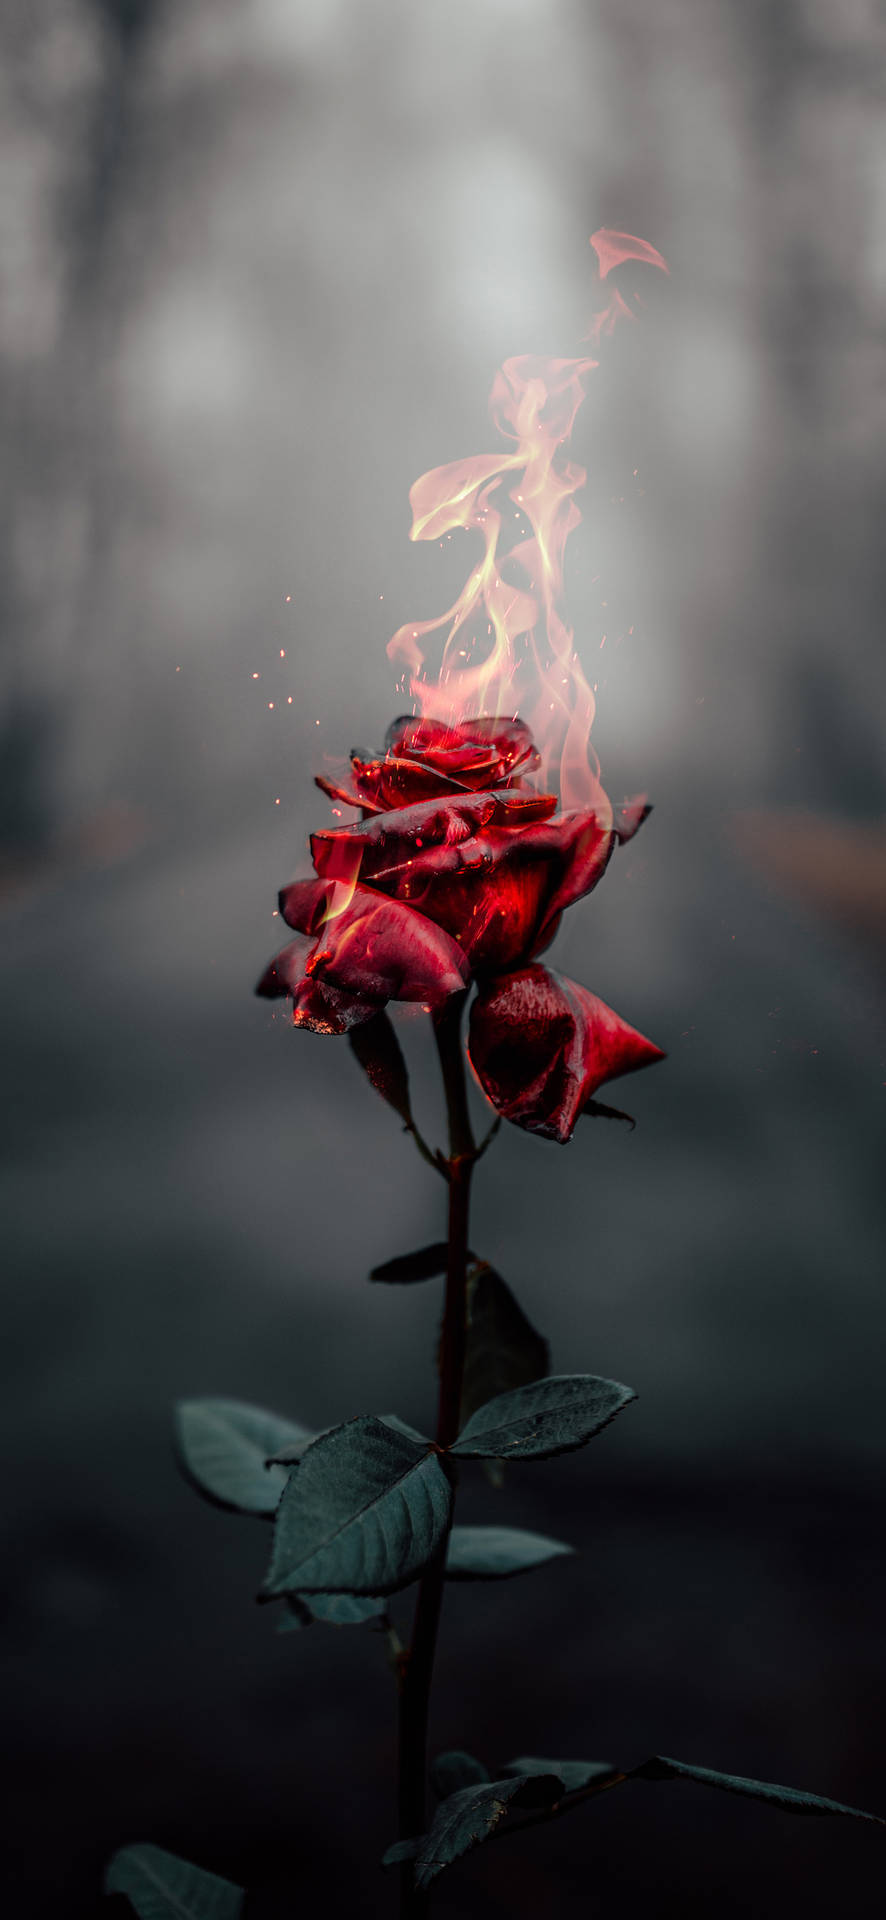 Iphone Aesthetic Flaming Rose